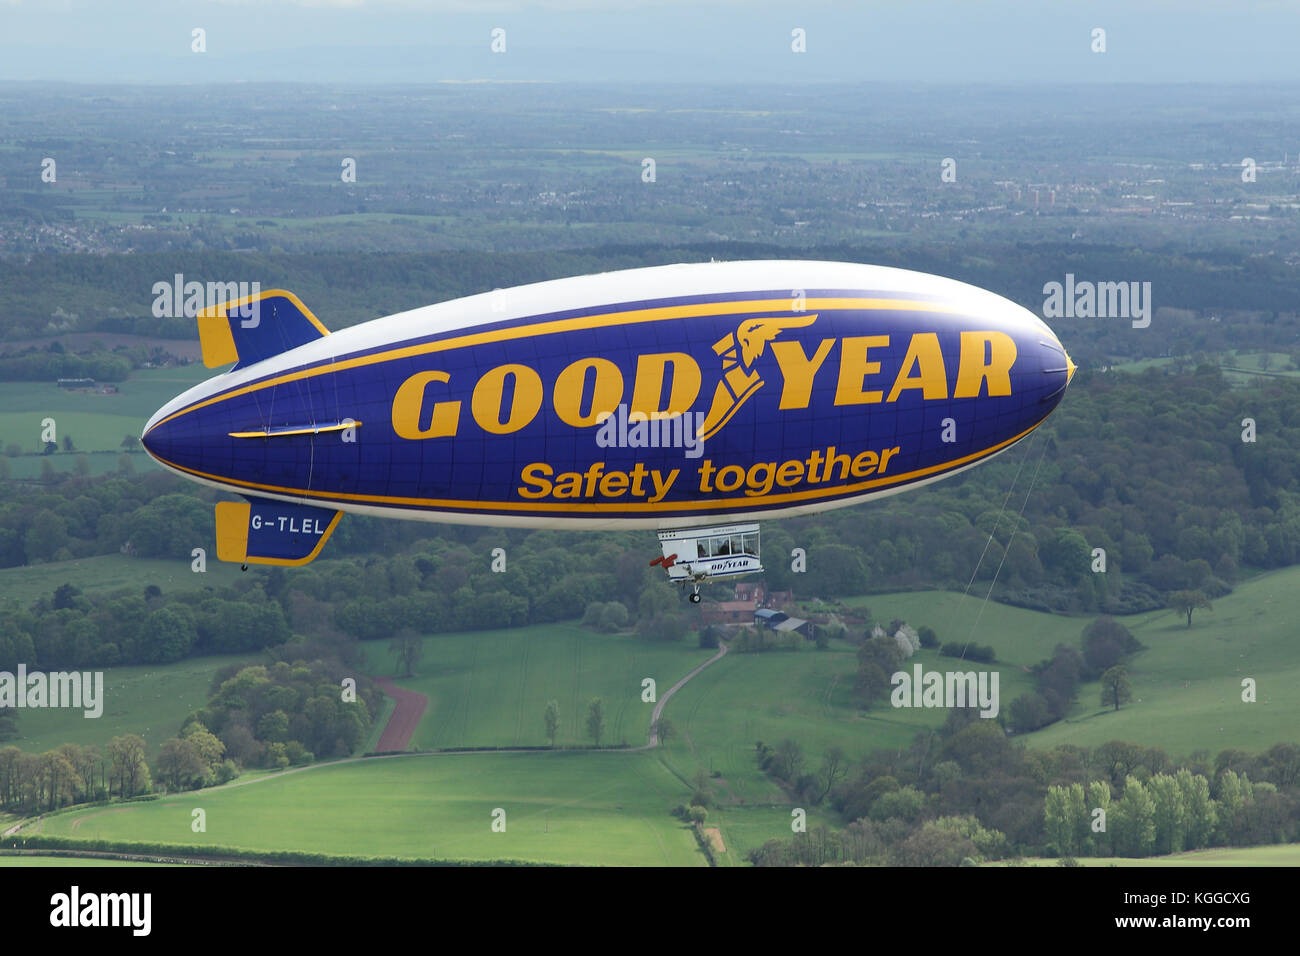 Air to air in flight Goodyear dirigible blimp / airship G-TLEL Spirit of Safety airborne flying over Shropshire countryside from Halfpenny Green. Stock Photo